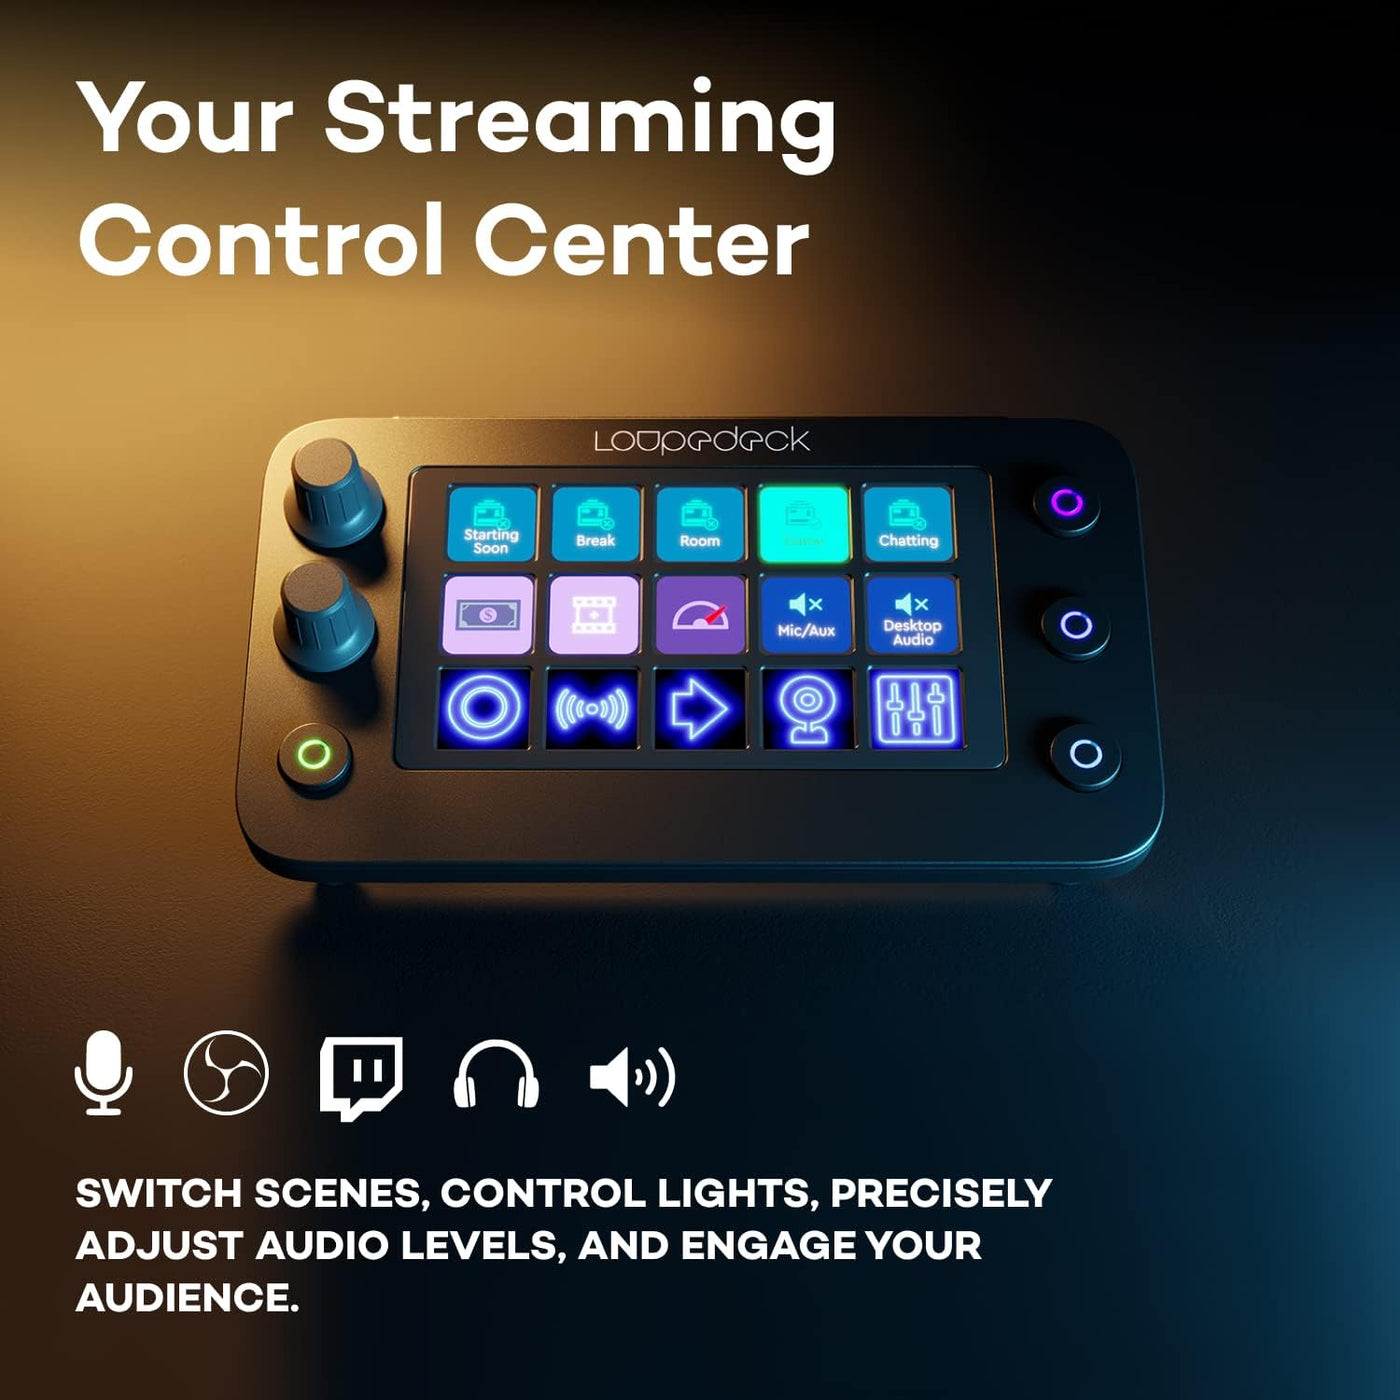 The Streaming Console for Desktop Productivity